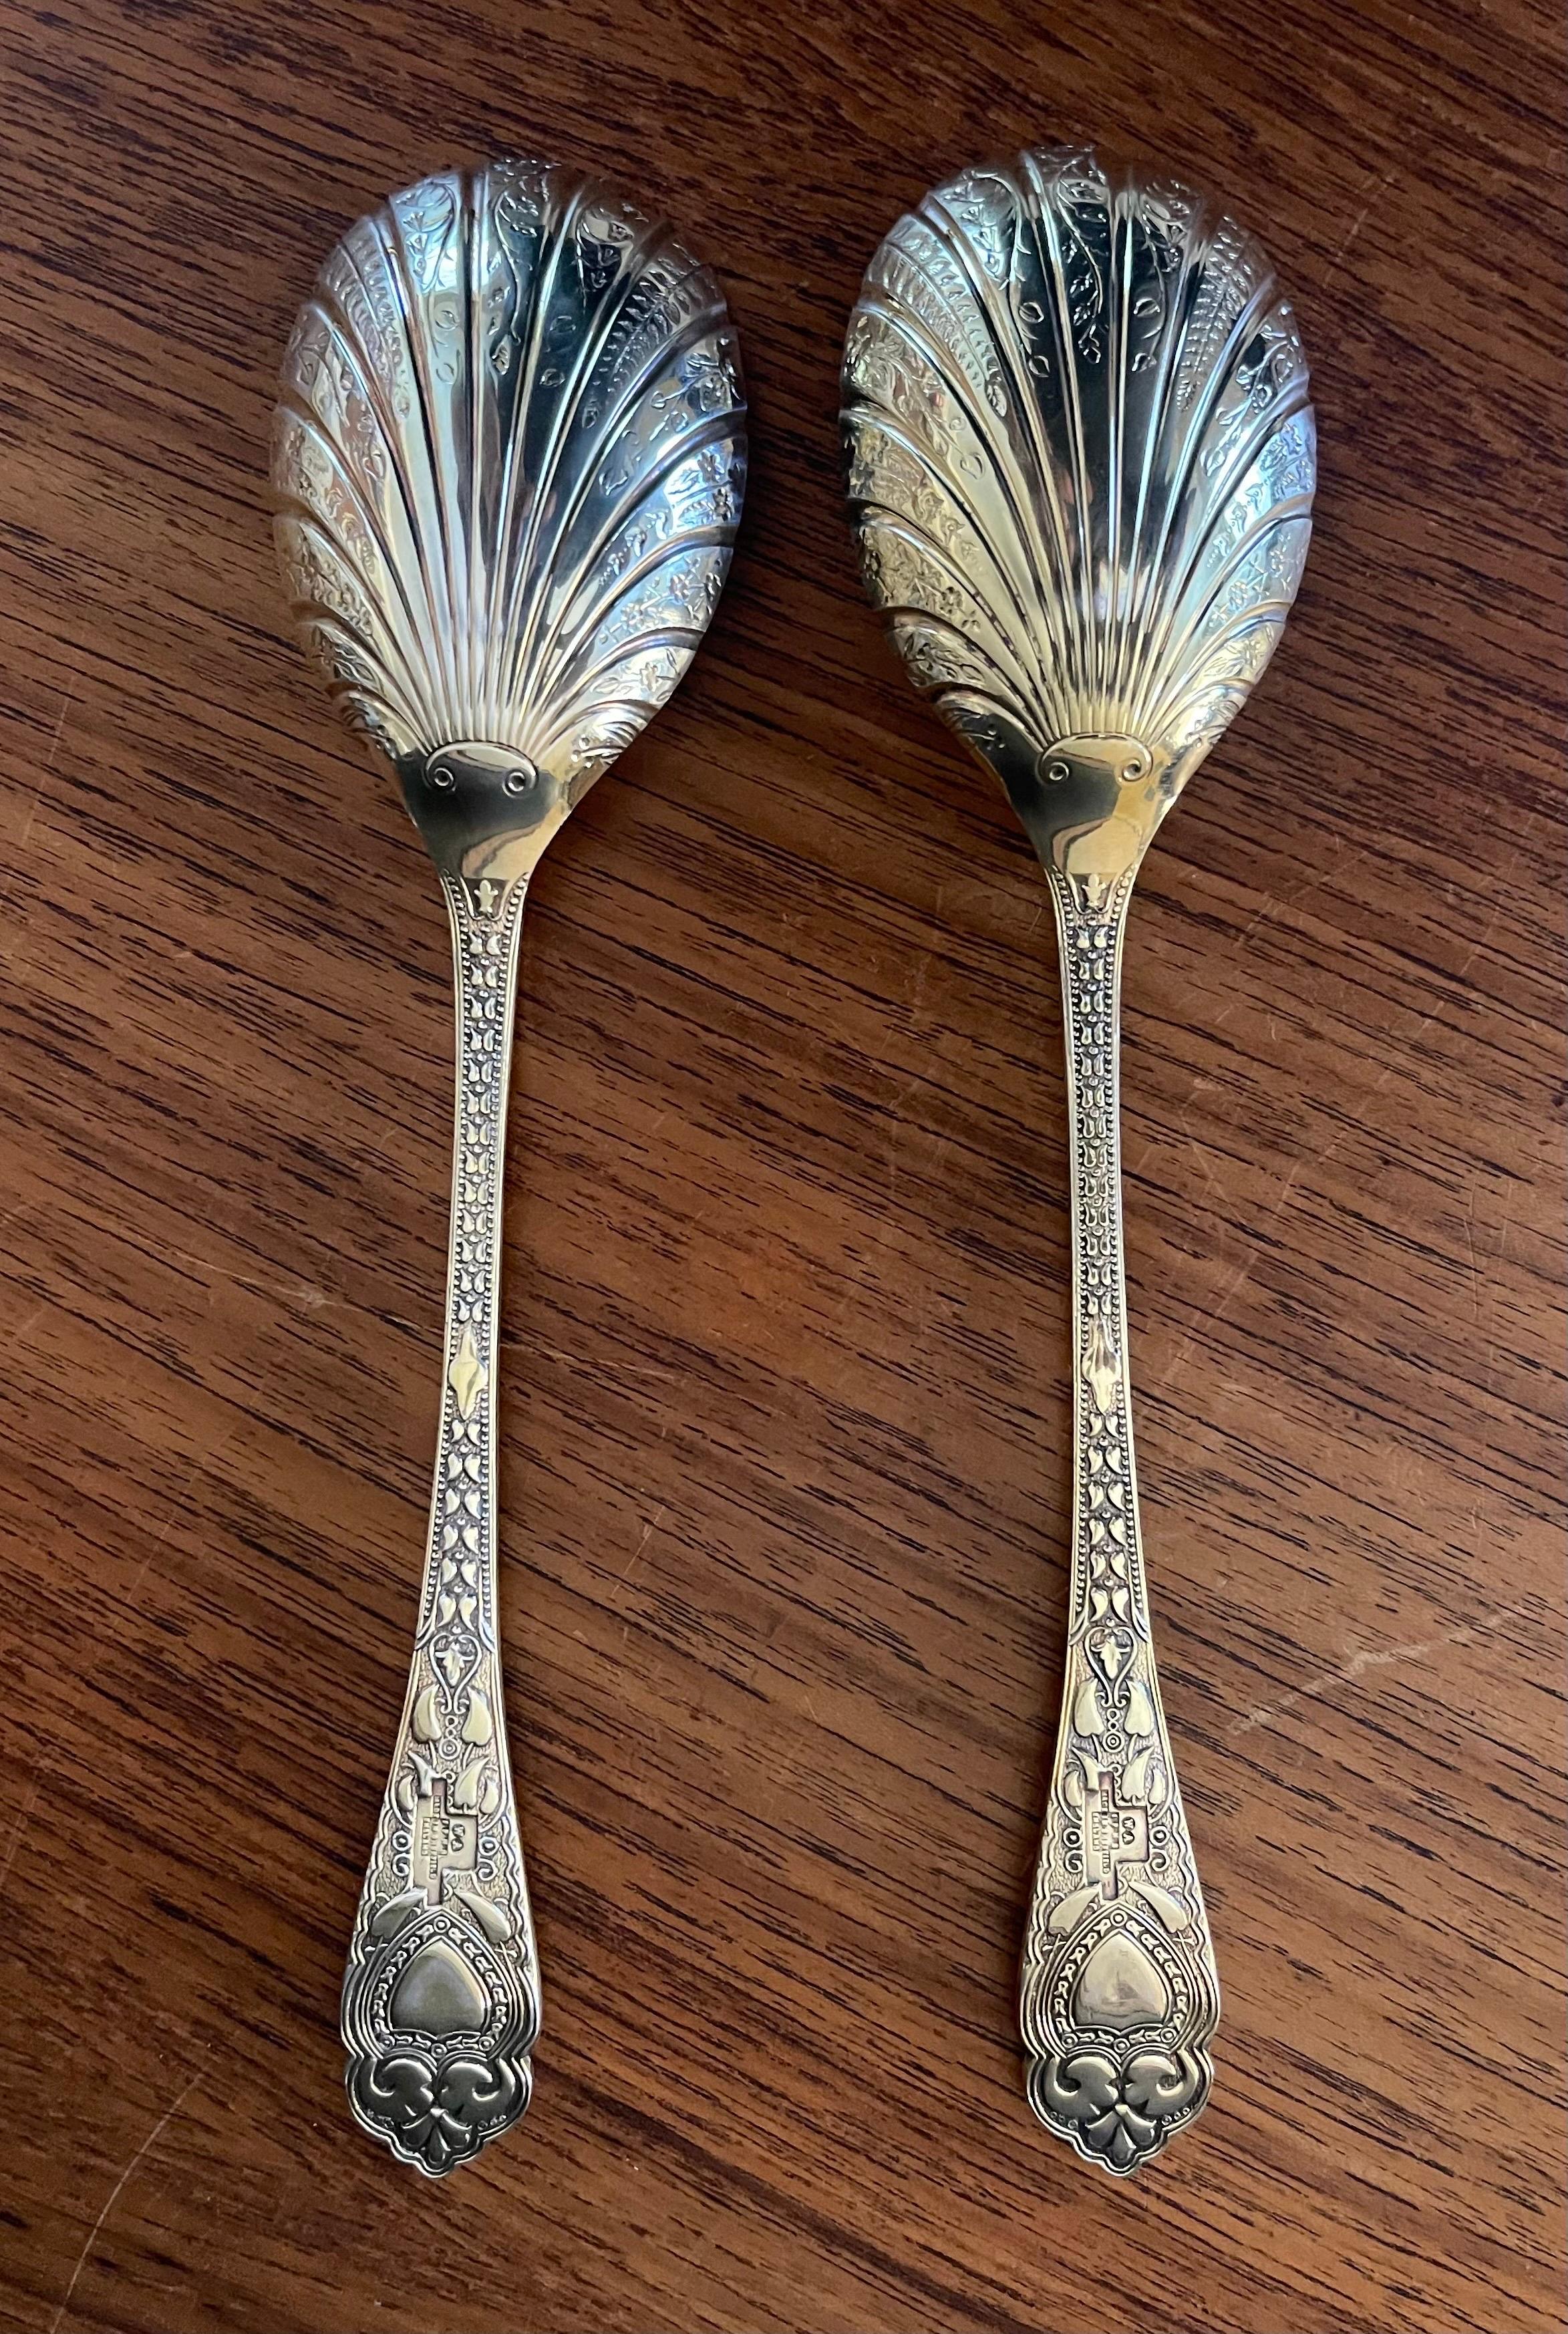 20th Century Pair of English Sheffield Silver Plated Serving Spoons in Box by I. Magnin For Sale